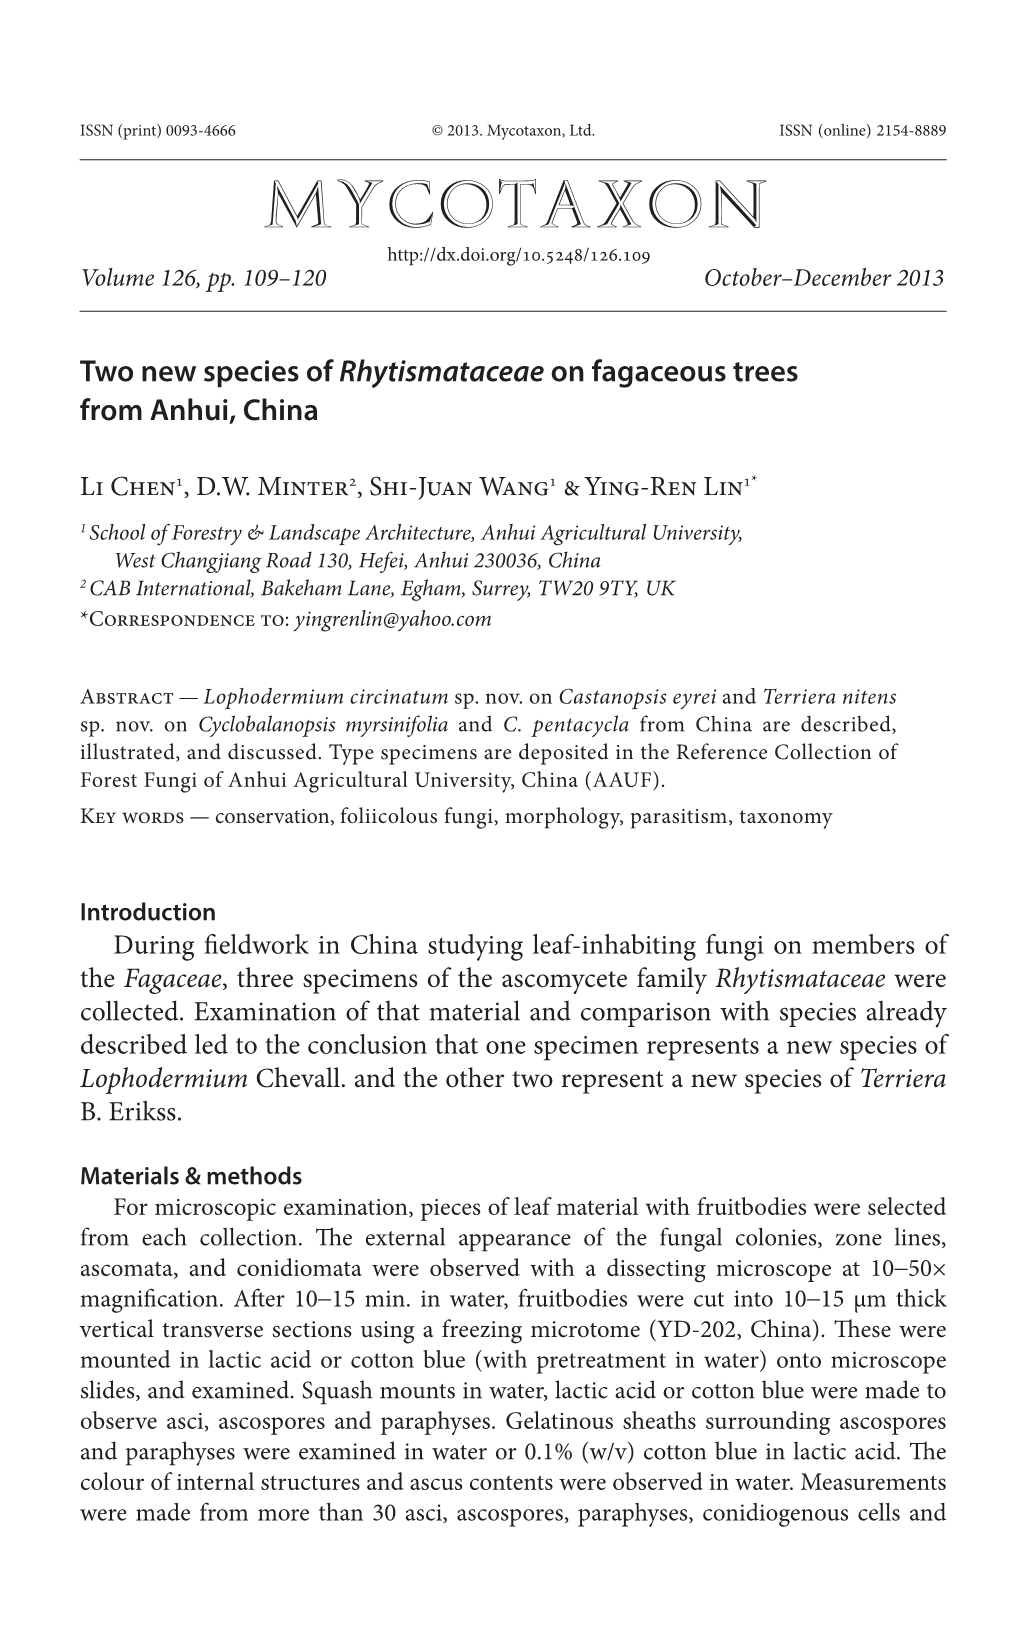 &lt;I&gt;Rhytismataceae&lt;/I&gt; on Fagaceous Trees from Anhui, China